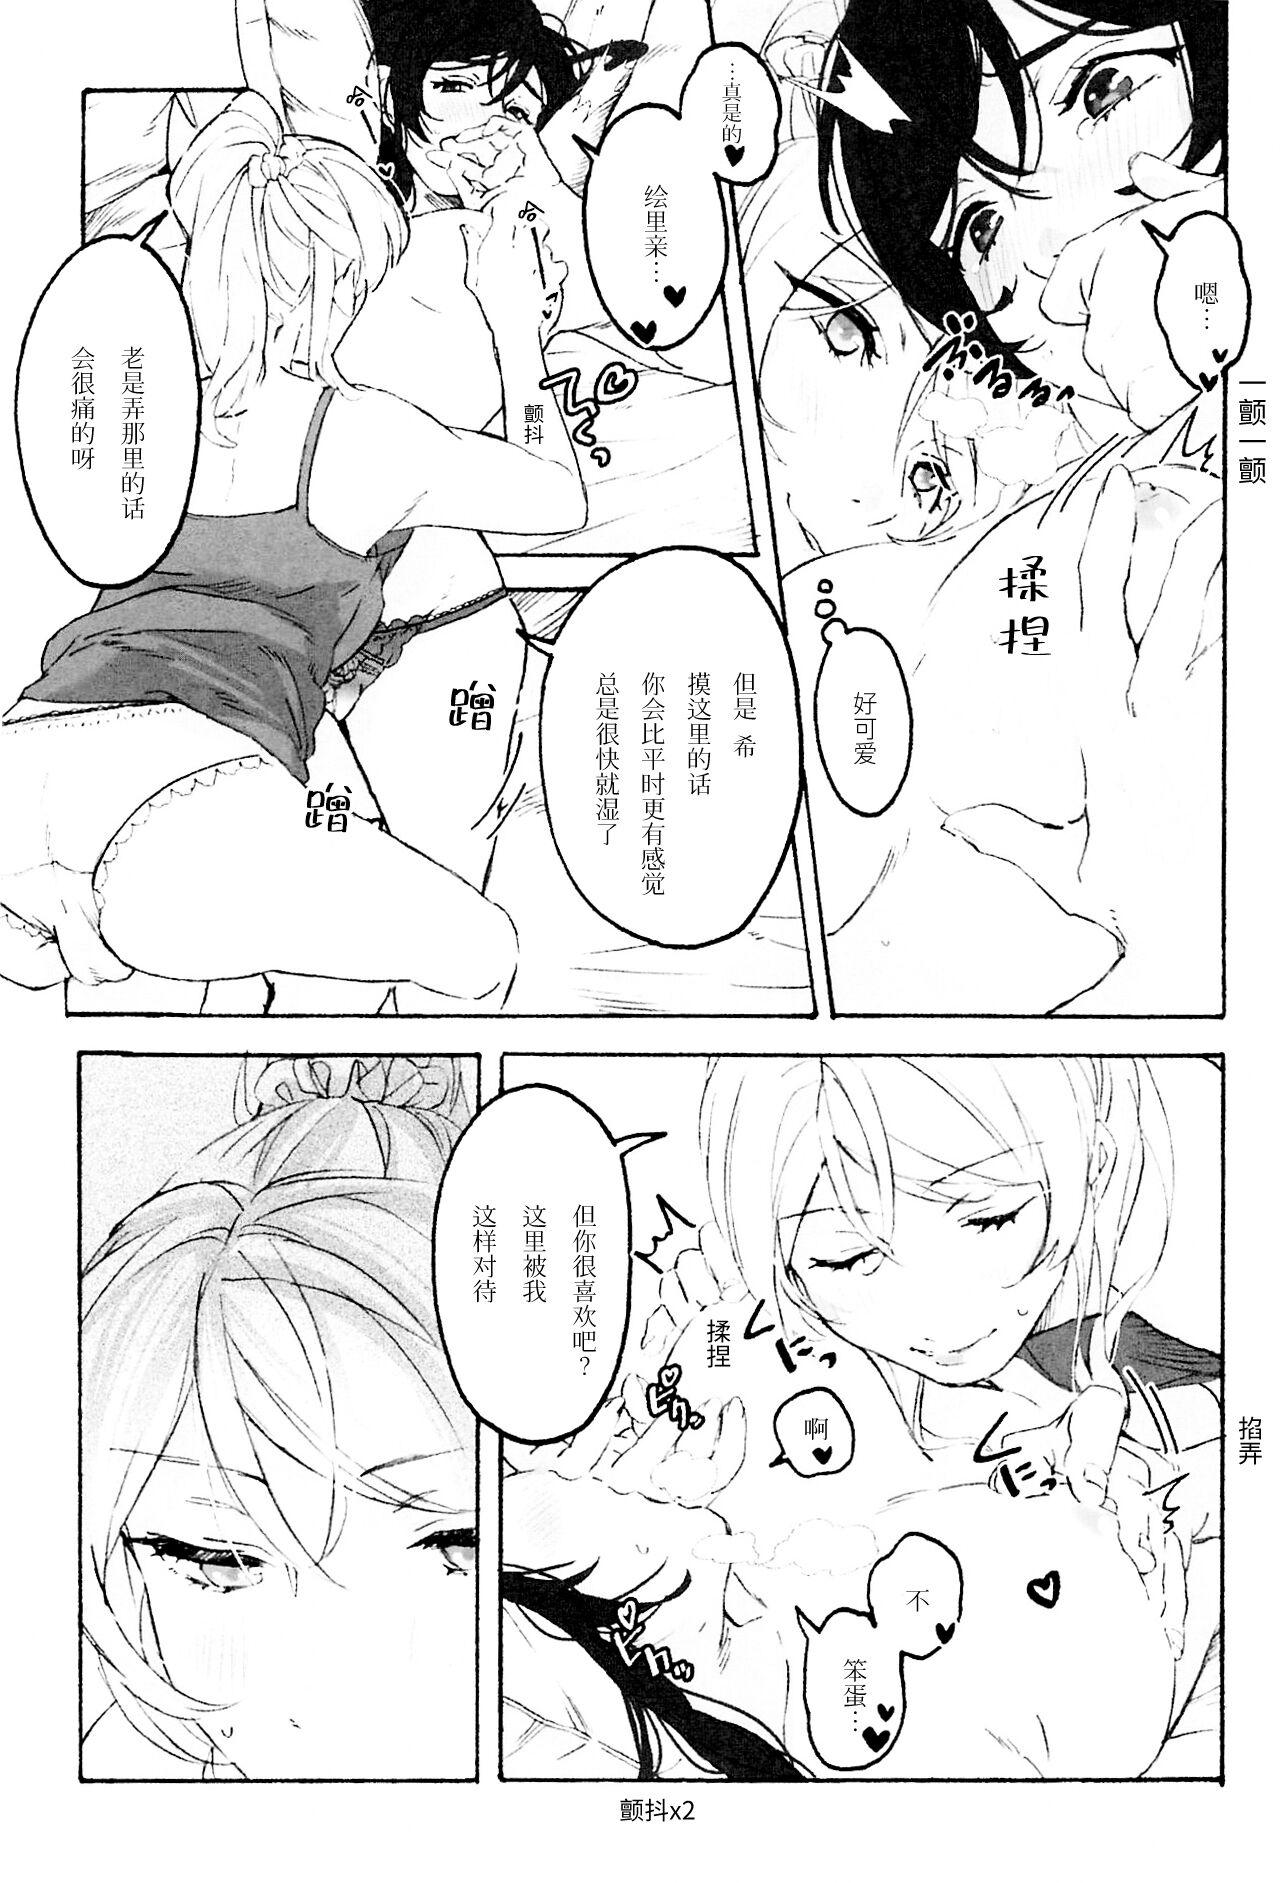 Bathroom My dear QUEEN - Love live Sex Party - Page 11